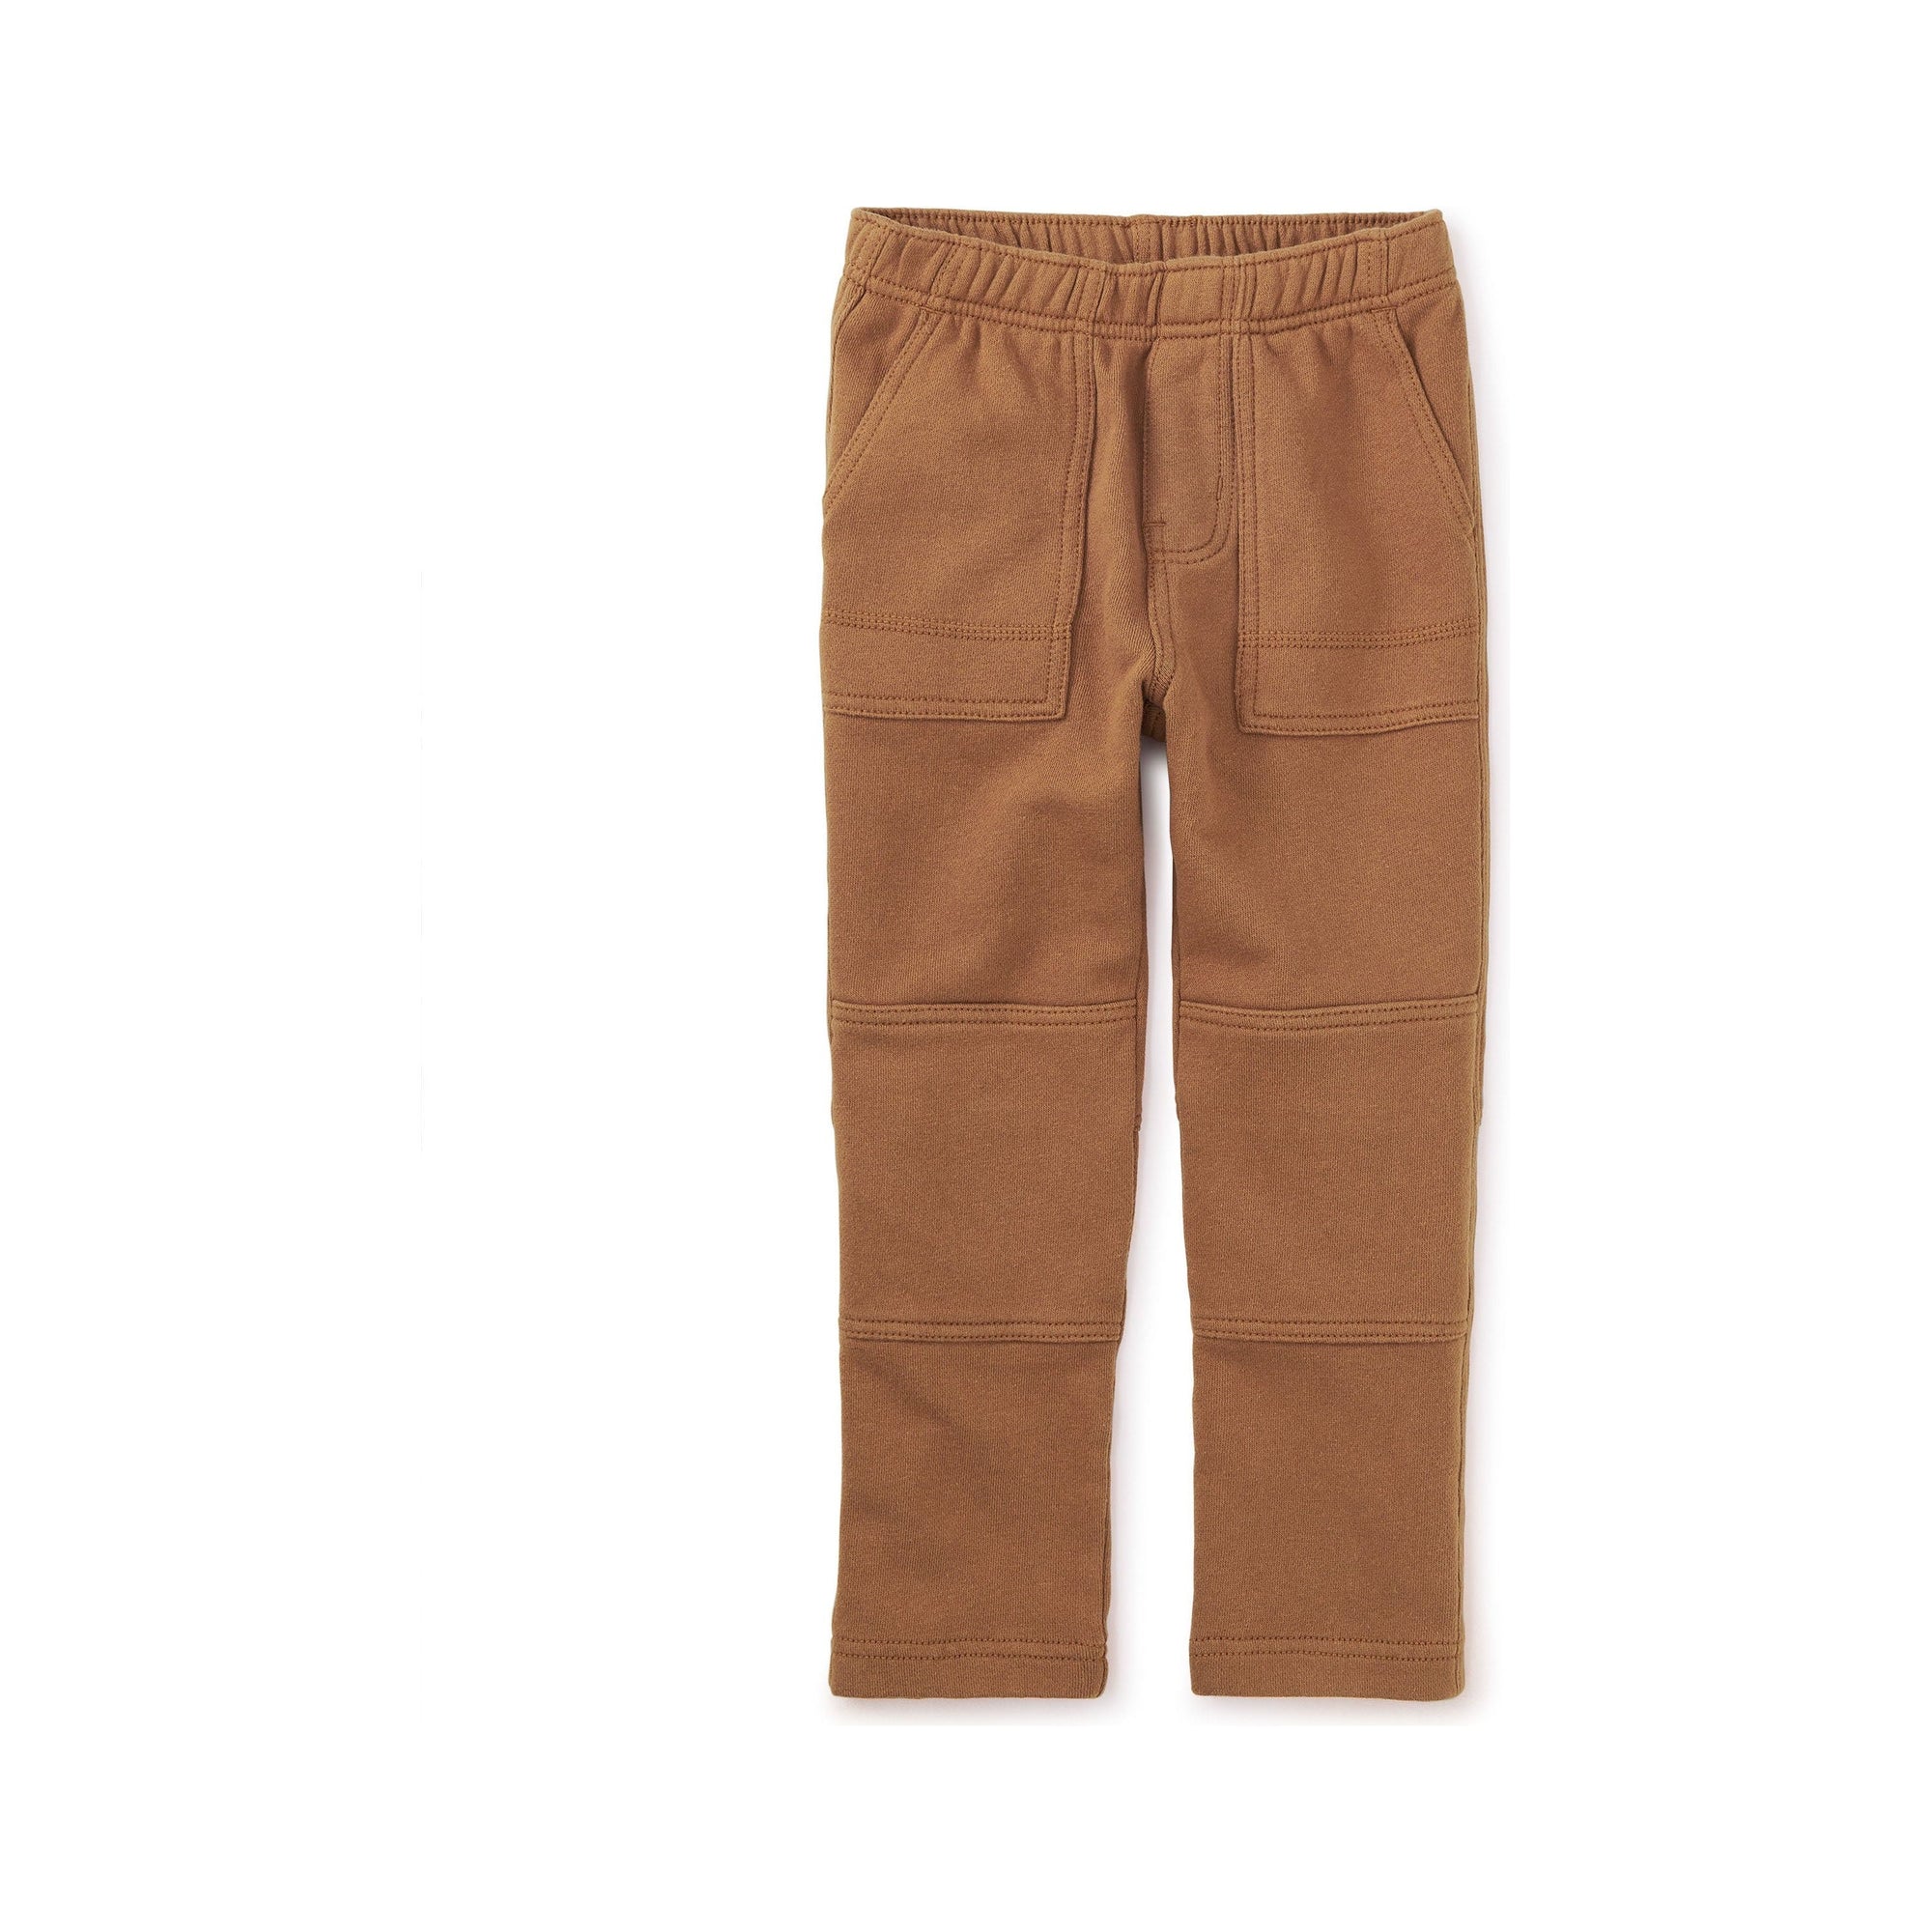 French Terry Playwear Pants - Acorn